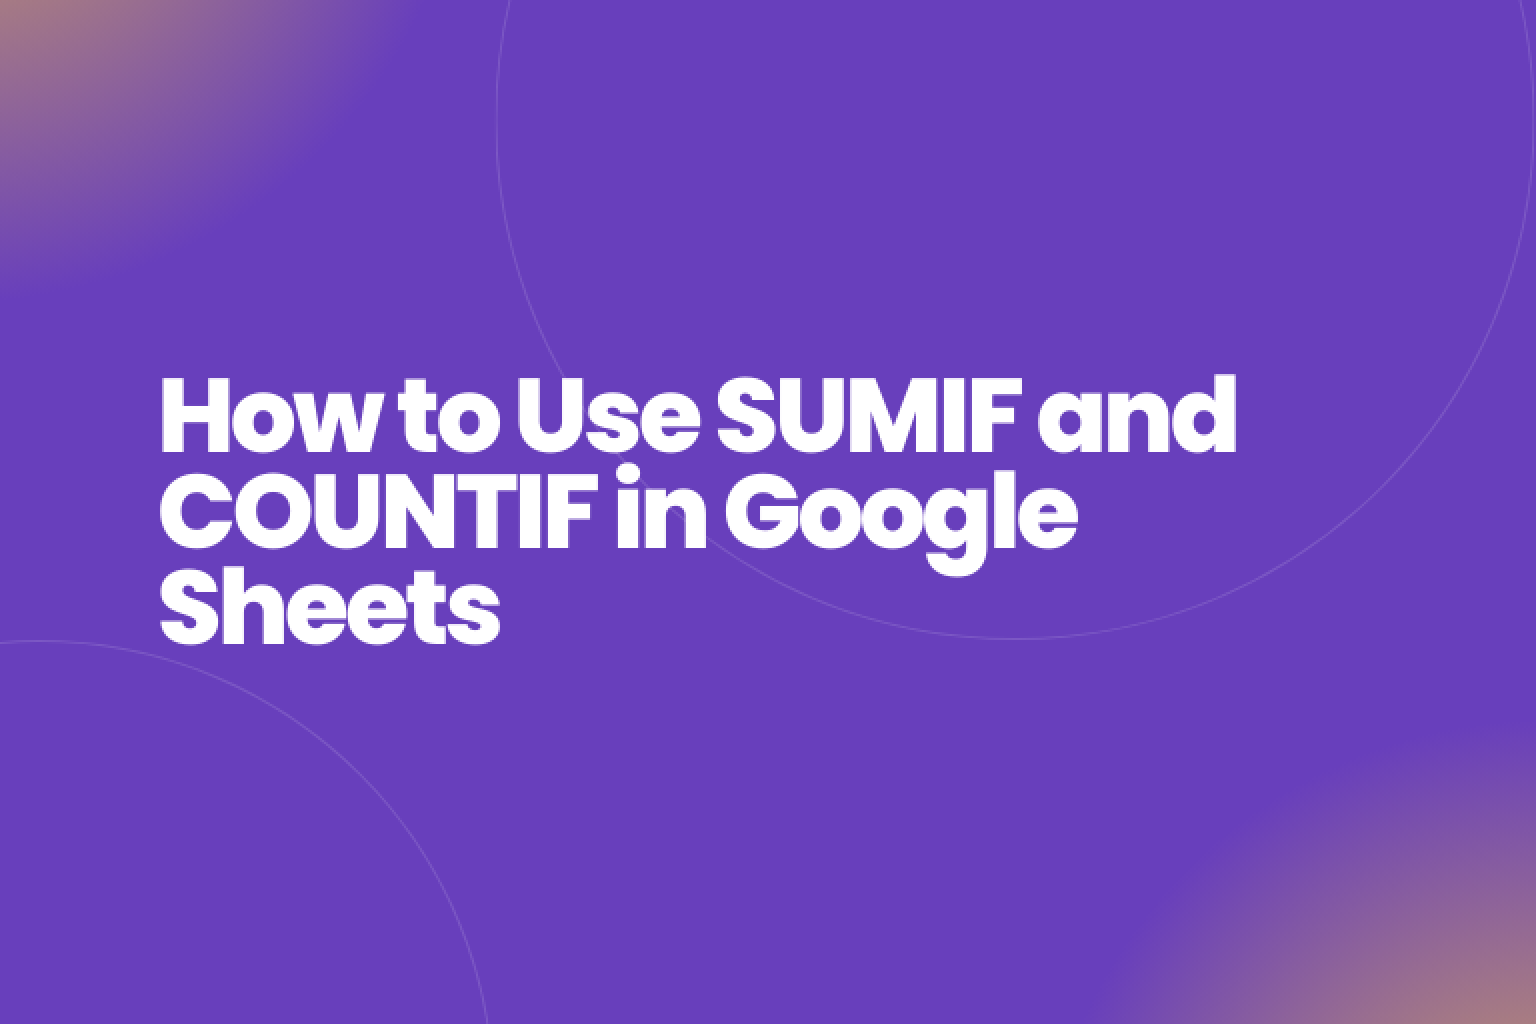 Boost your Google Sheets expertise by mastering SUMIF and COUNTIF functions. Learn the syntax, explore real-life examples, and leverage wildcard techniques for advanced data analysis and summary tasks.